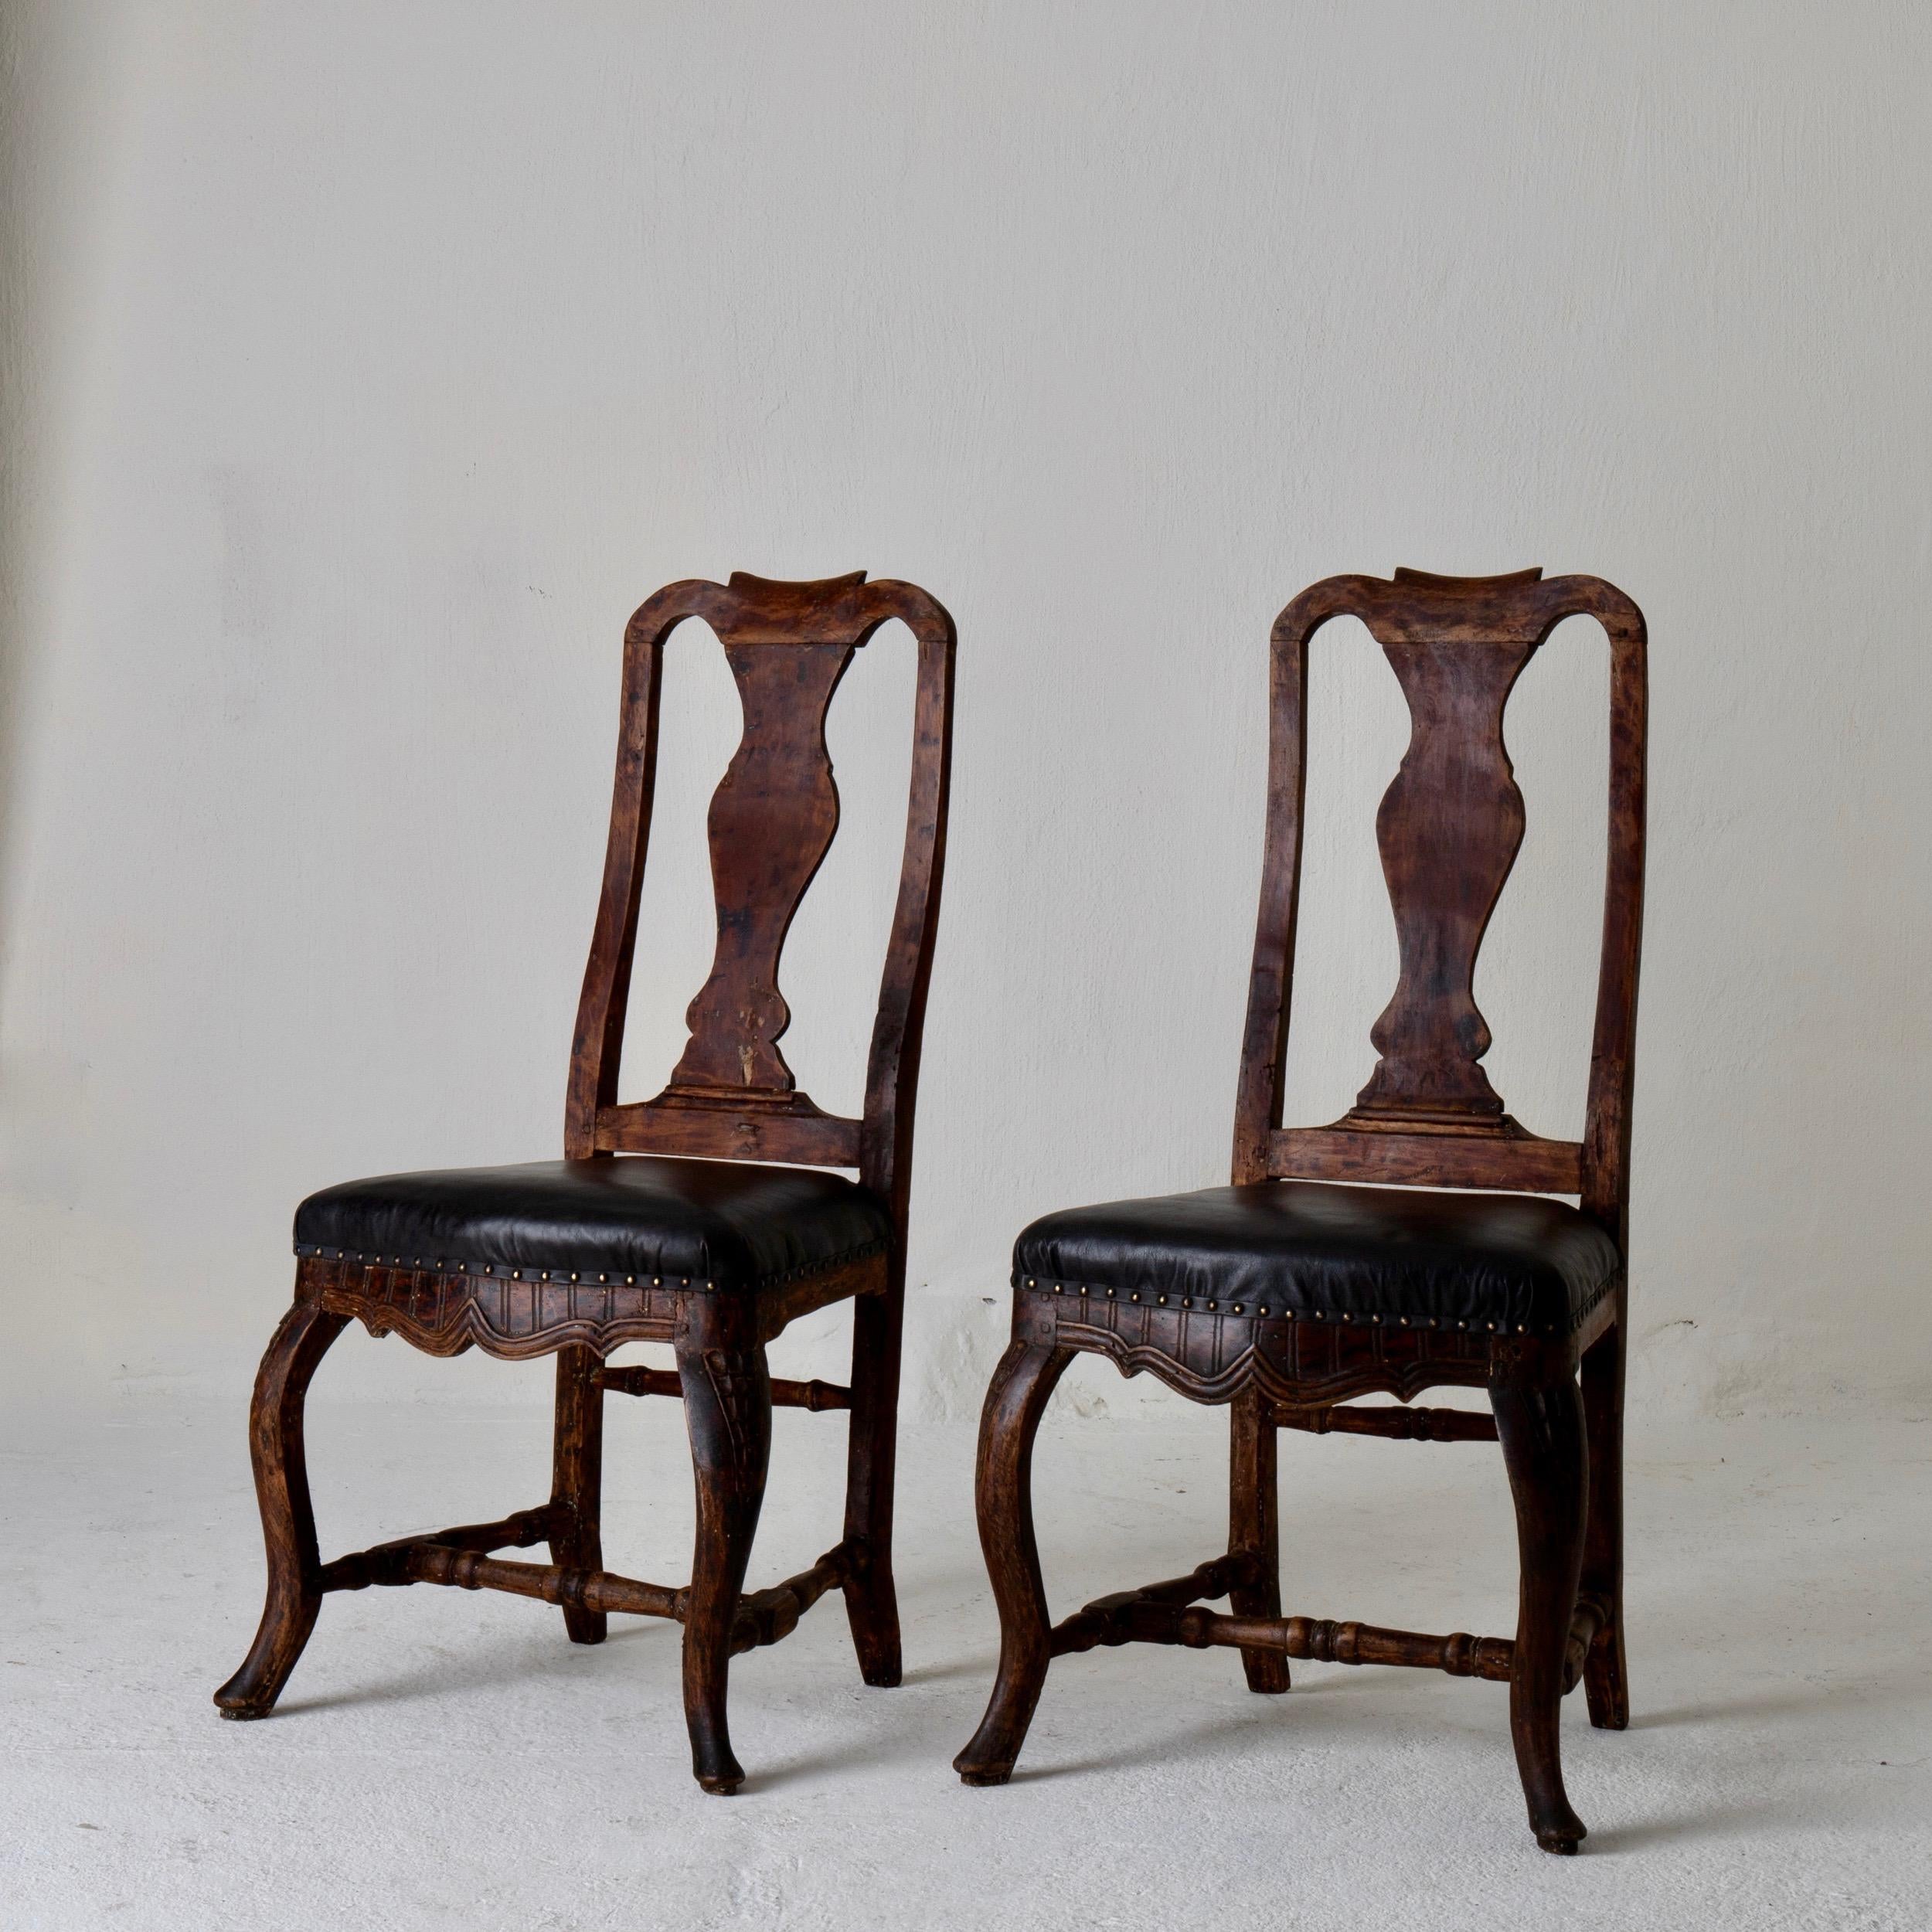 Chairs pair of Swedish Baroque brown black Sweden. A pair of side chairs made during the Baroque period in Sweden. A dark brown frame with discrete carvings. Seat upholstered in soft black leather lined with brass nailheads.
    
  